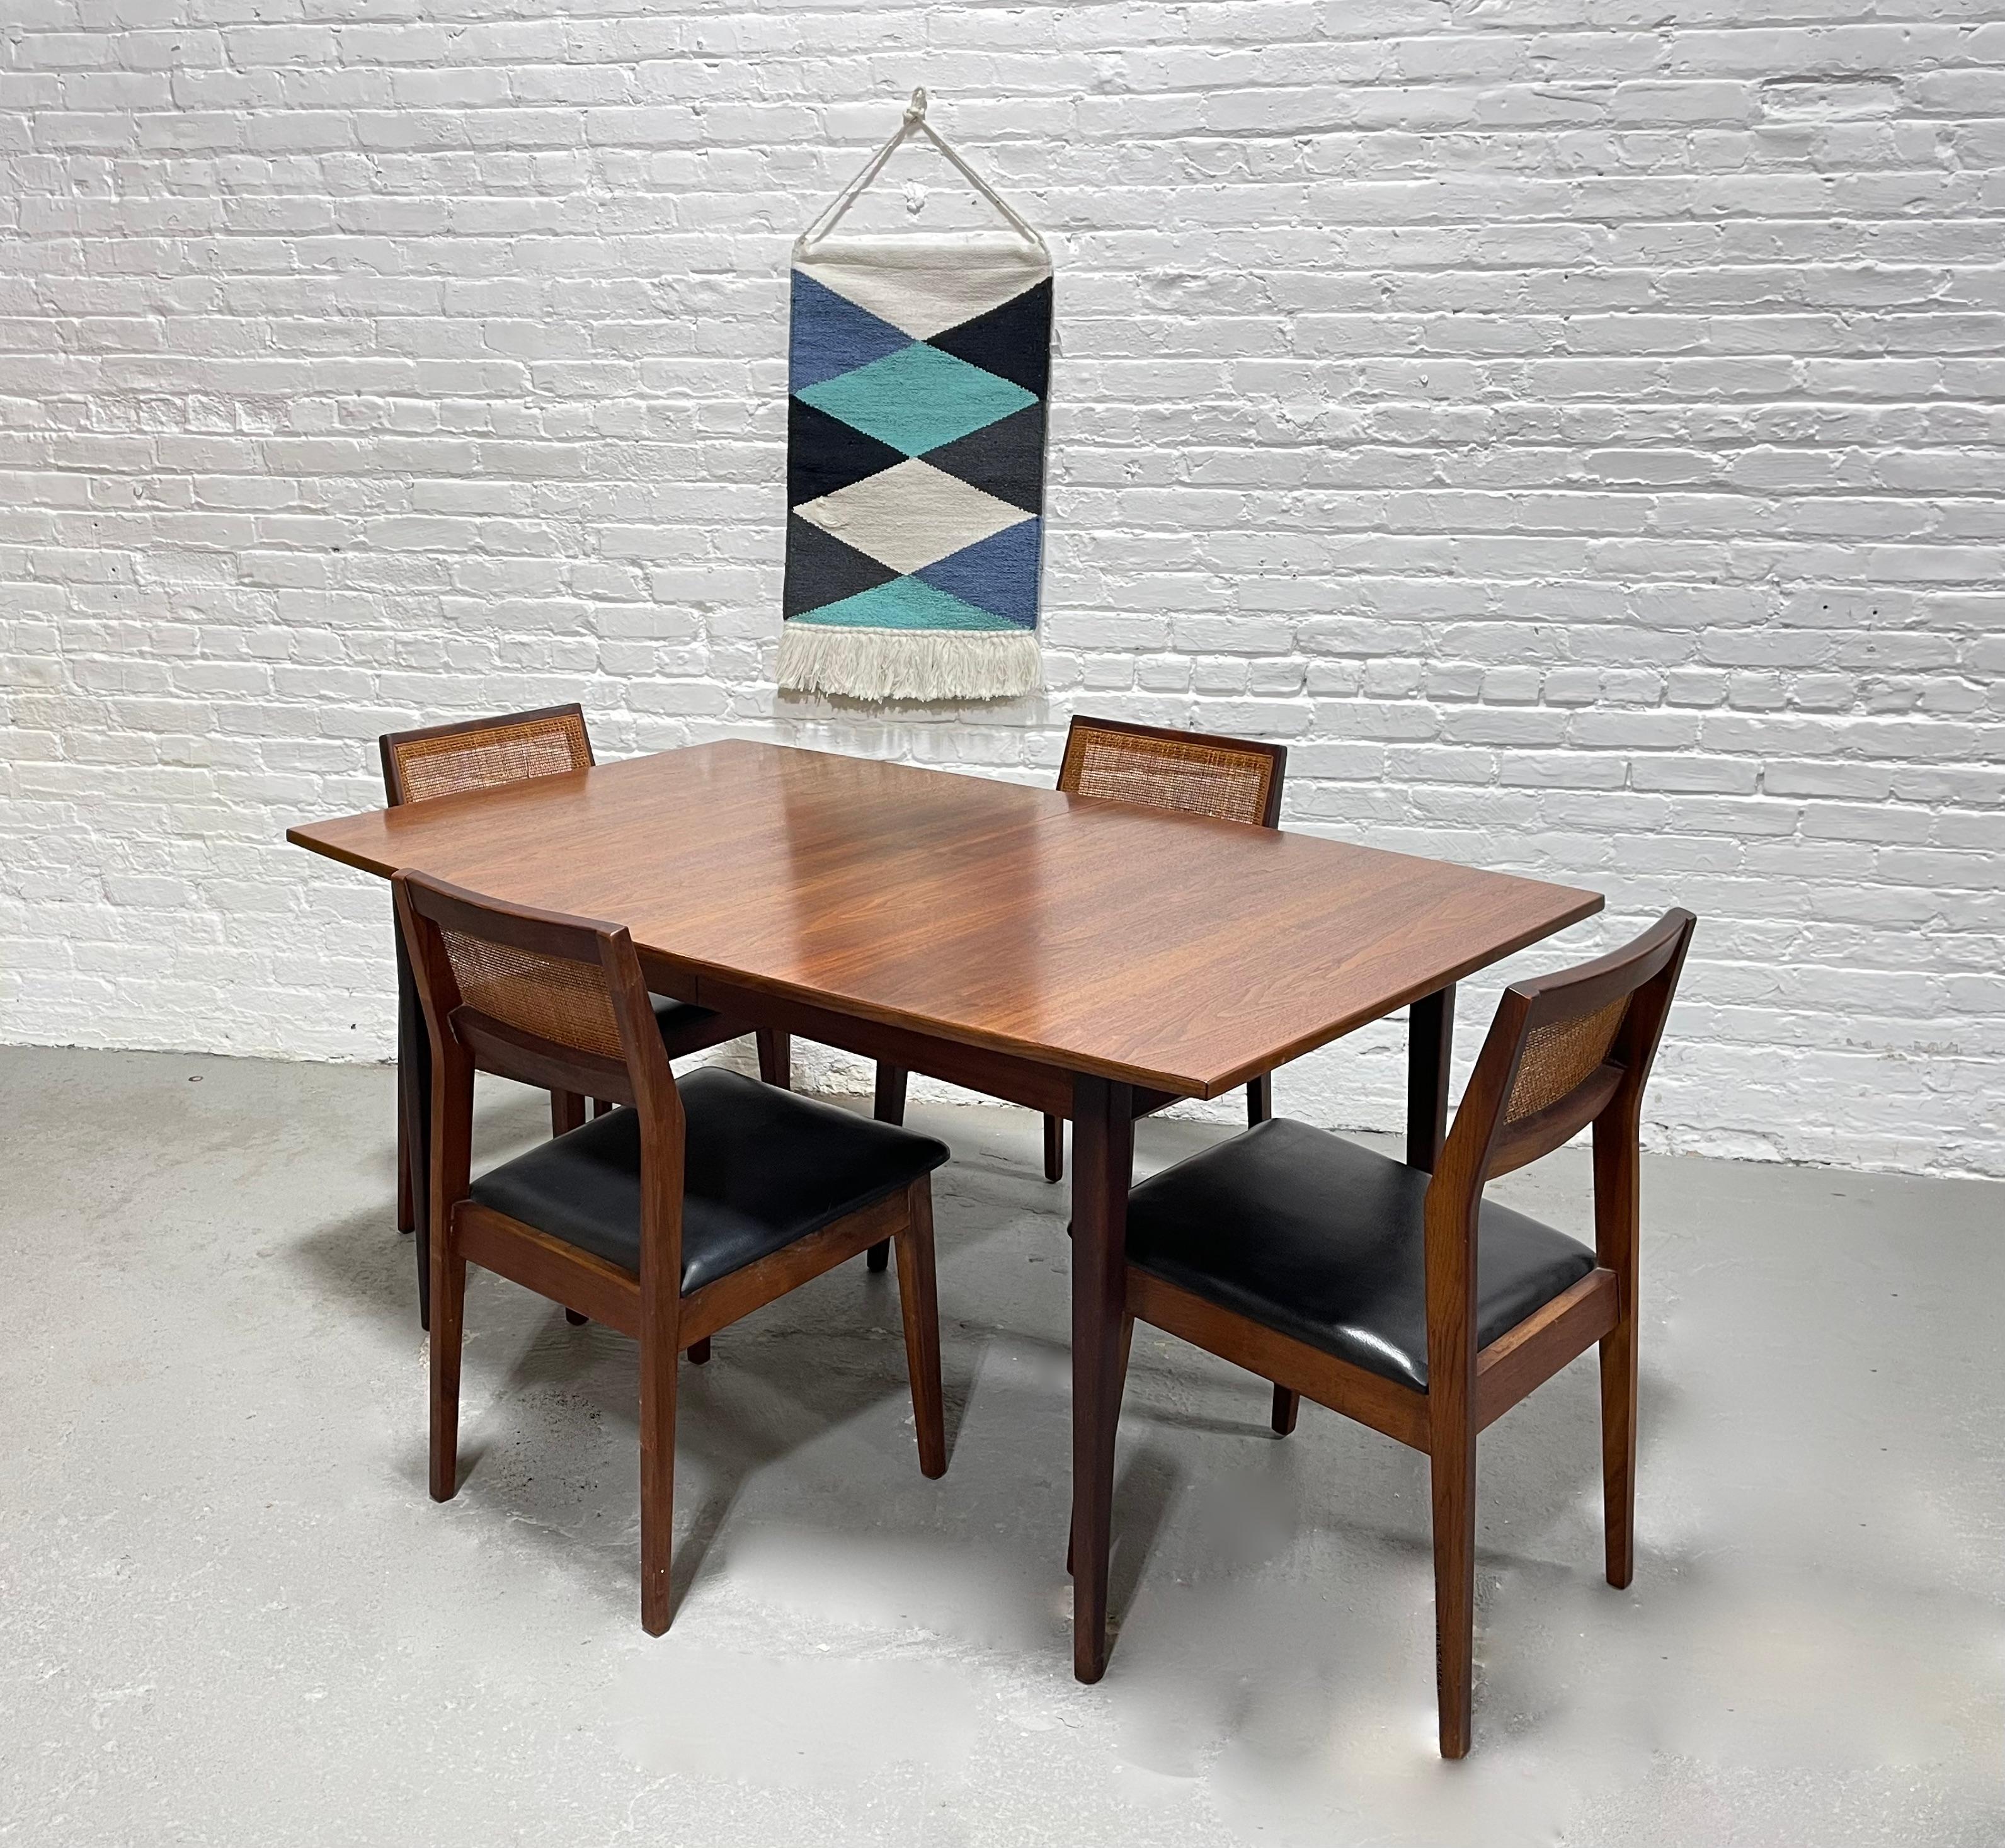 Perfectly sized Mid Century Modern WALNUT DINING TABLE, c. 1960's. Comfortably seats 4-6 guests yet won't overwhelm a room. Solidly built from walnut wood with some of the most gorgeous wood grains we've seen on the newly refinished tabletop.  The